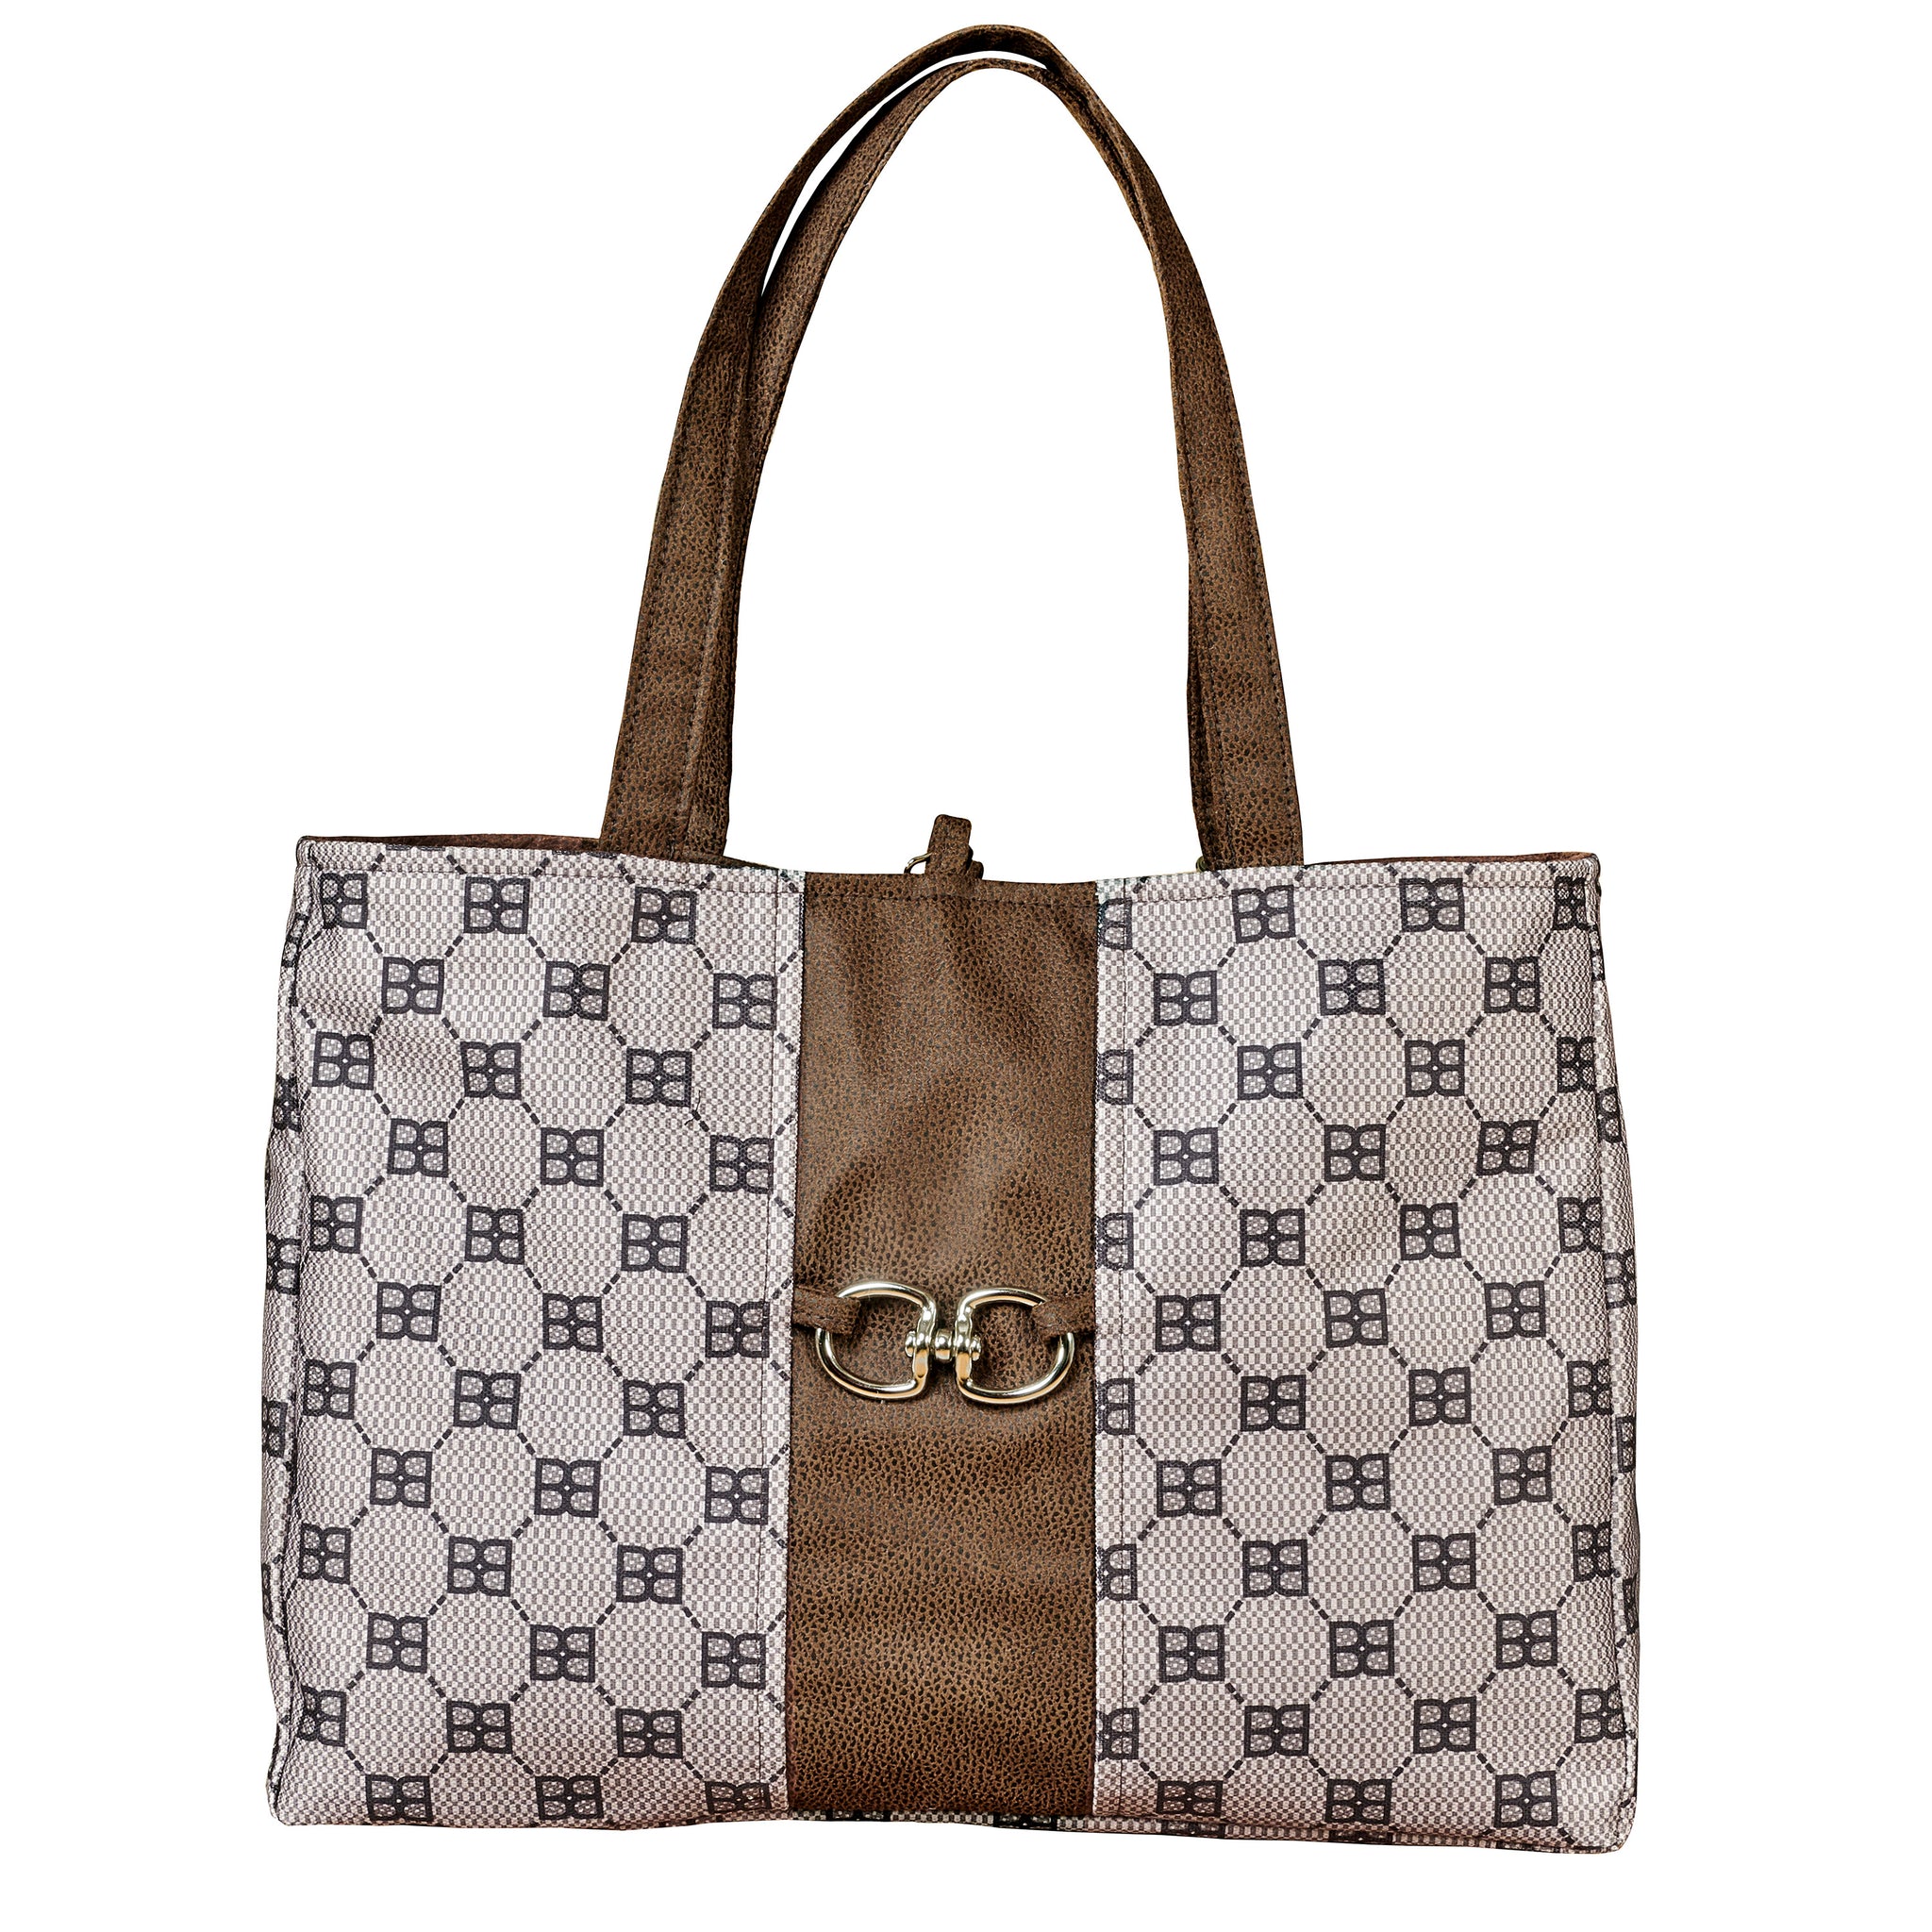 Gucci Pet carrier with Web